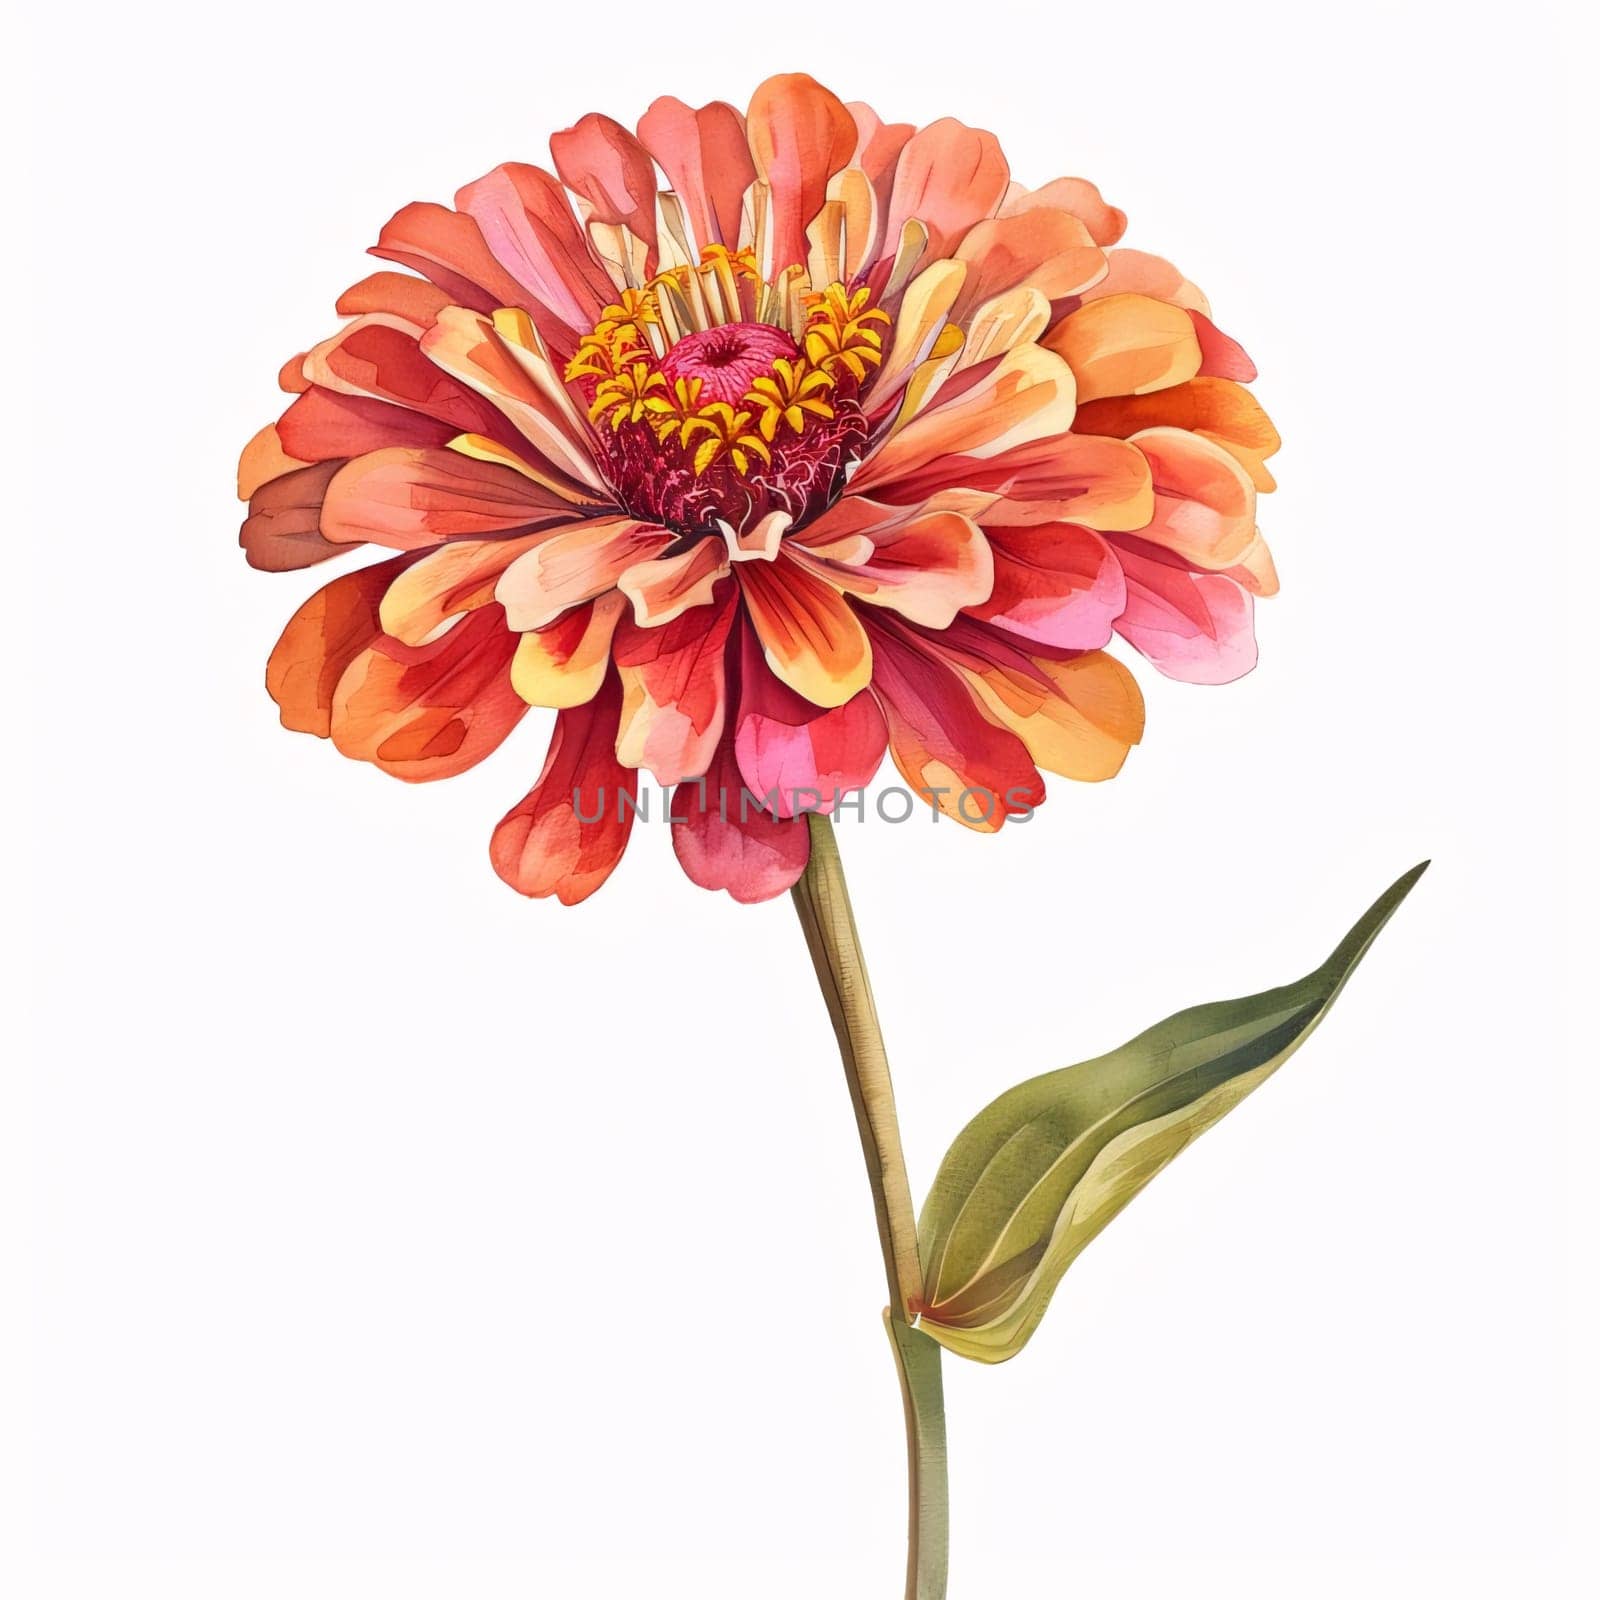 Drawn, painted flowers: orange flower with green stem and leaves. Flowering flowers, a symbol of spring, new life. A joyful time of nature waking up to life.